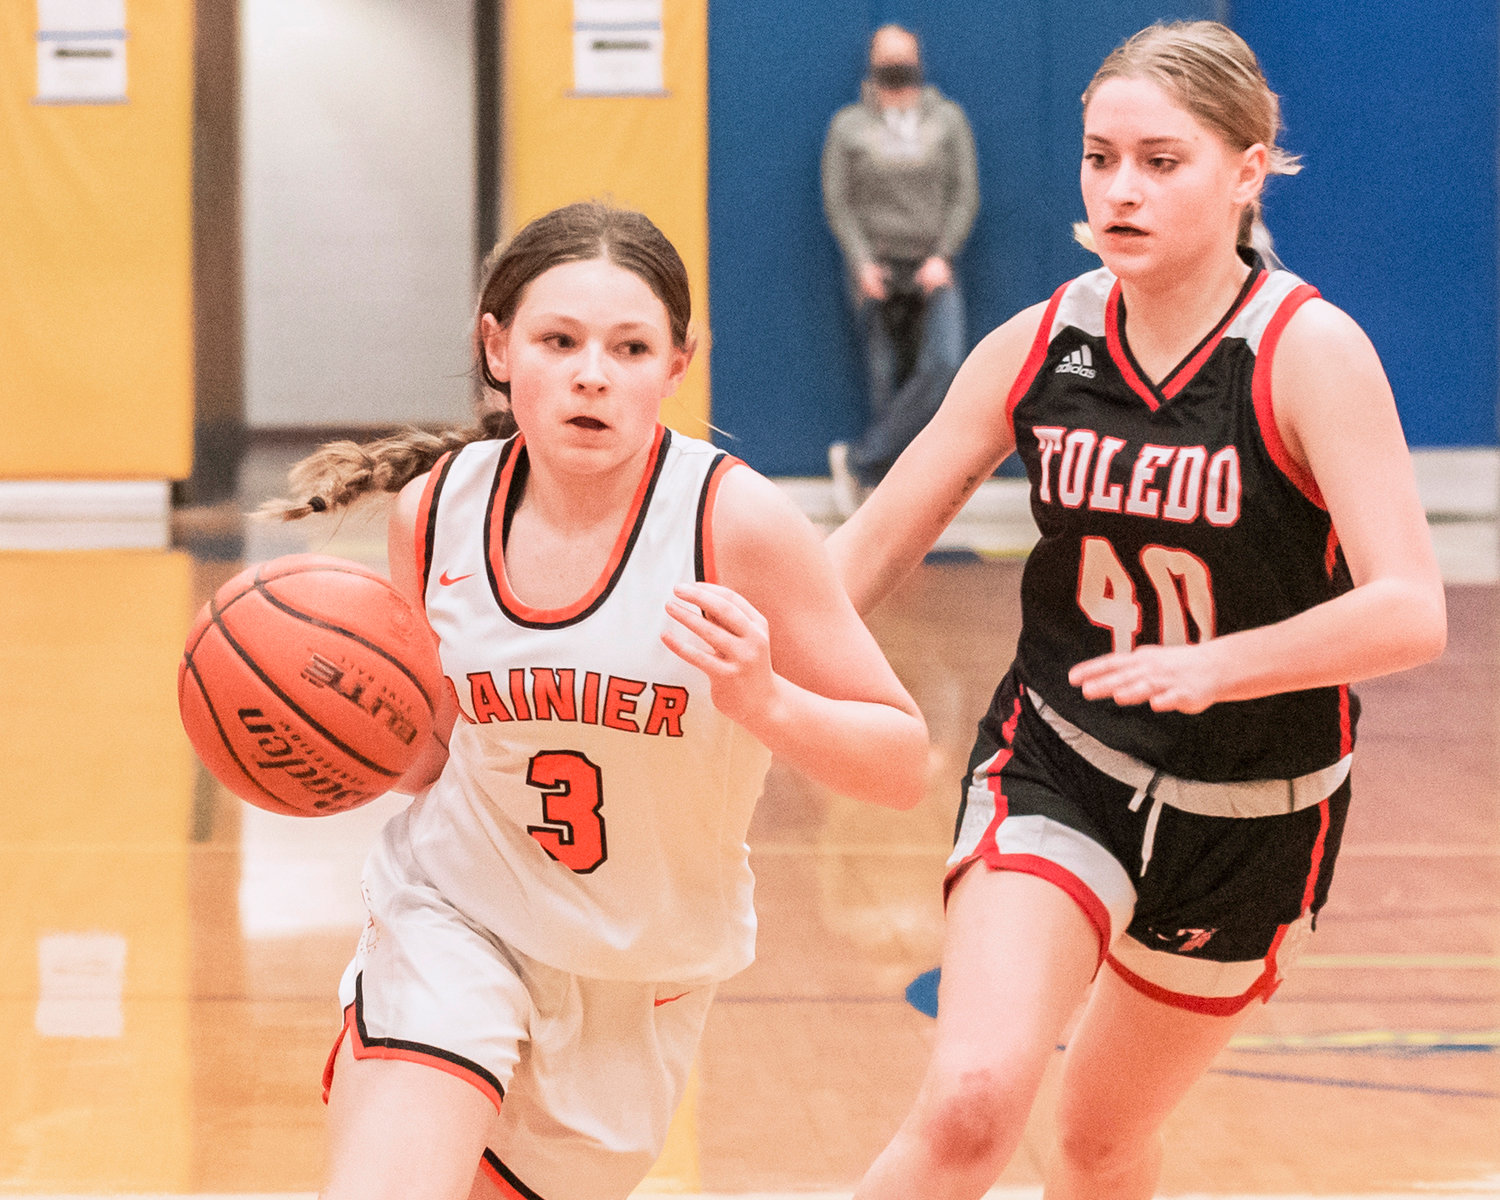 Rainier’s Brooklynn Swenson (3) dribbles the ball past a Toledo defender Thursday night during a game at Rochester High School.